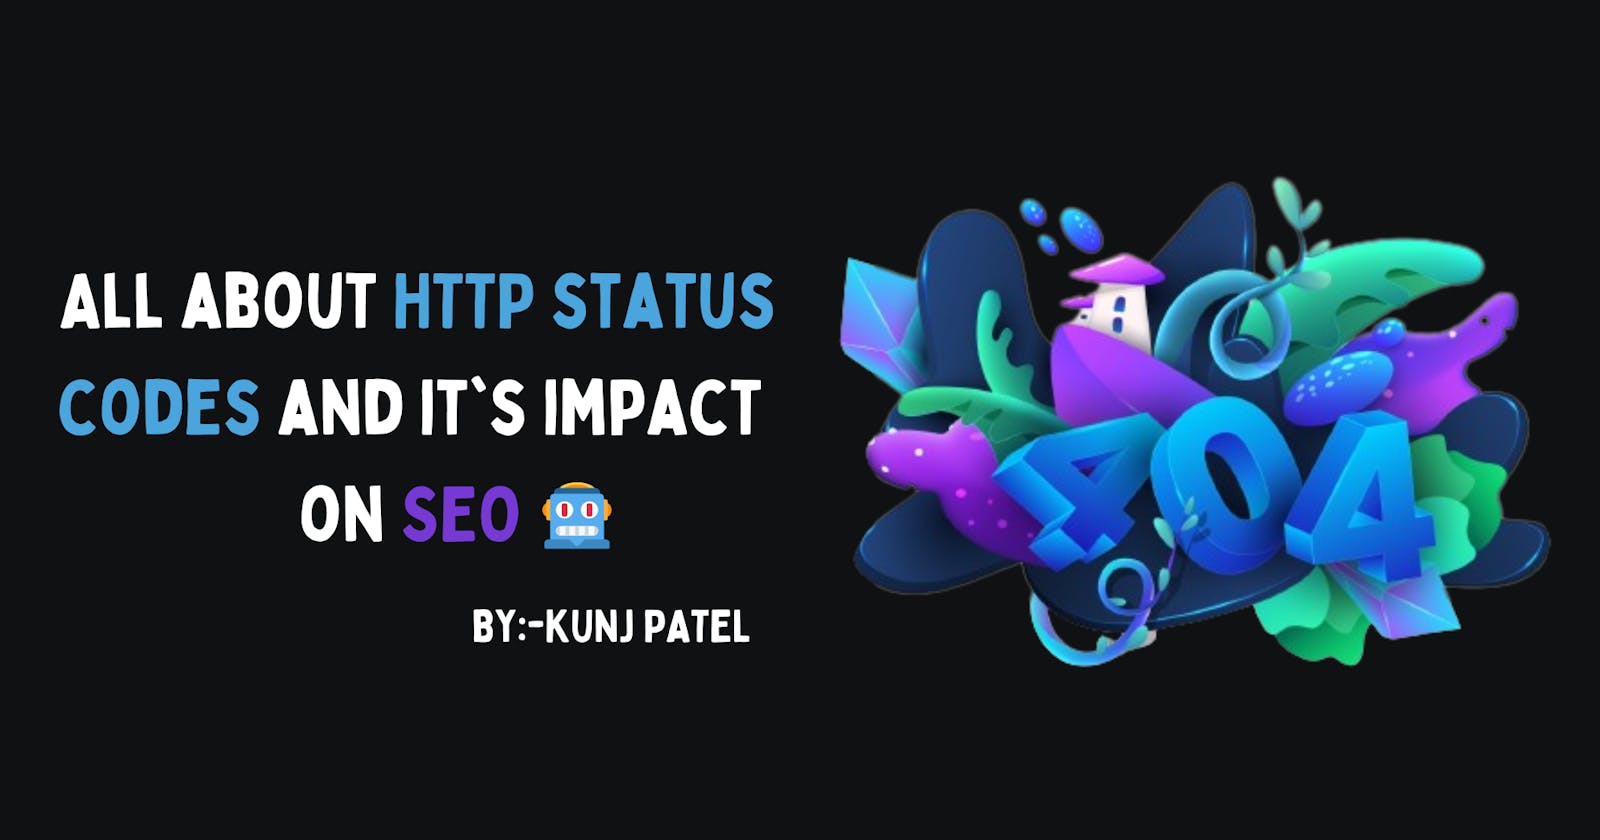 All about HTTP status codes and it's impact 
on SEO 🤖